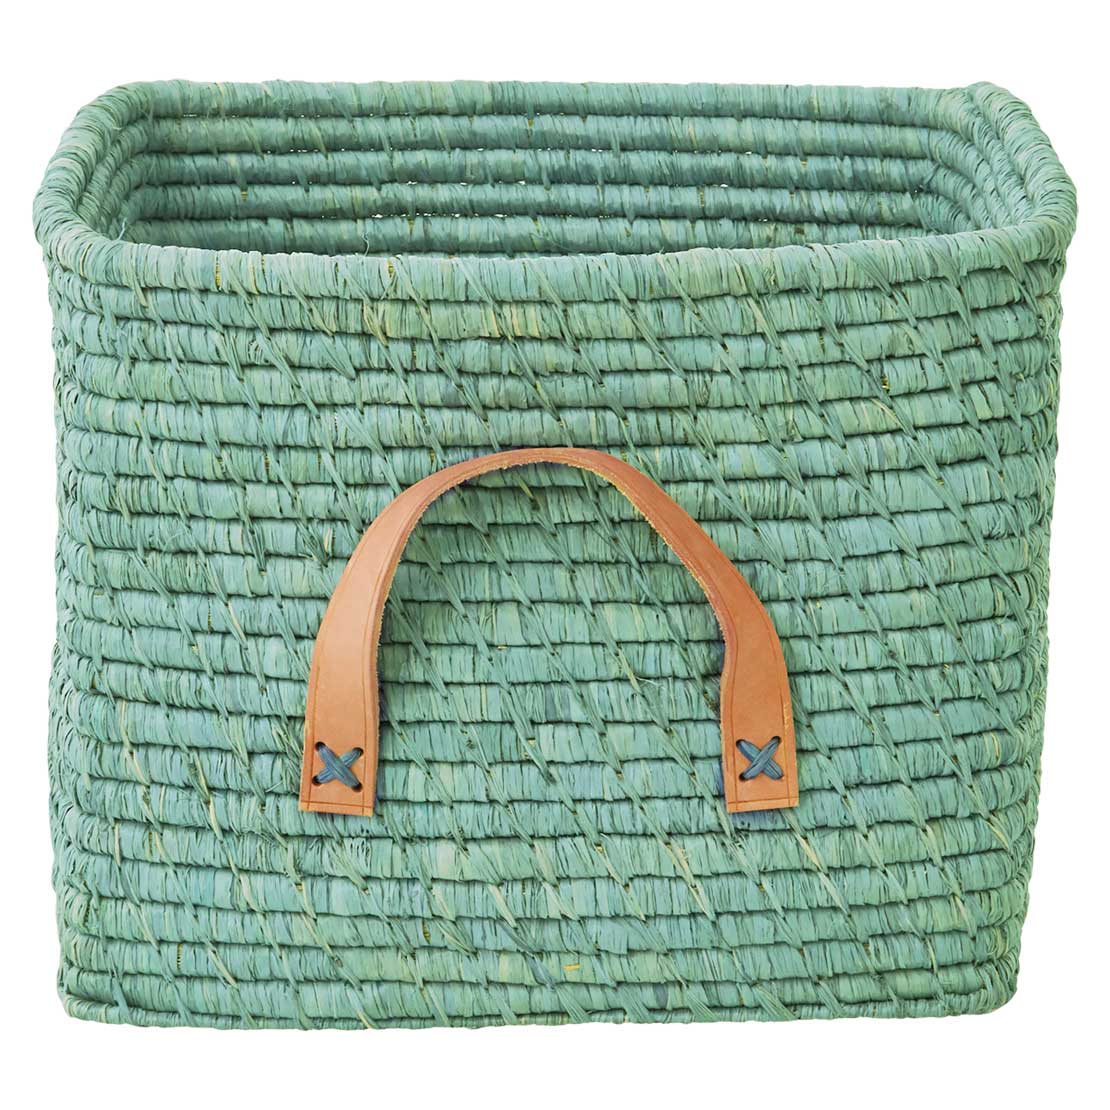 Basket with Leather Handles, Mint